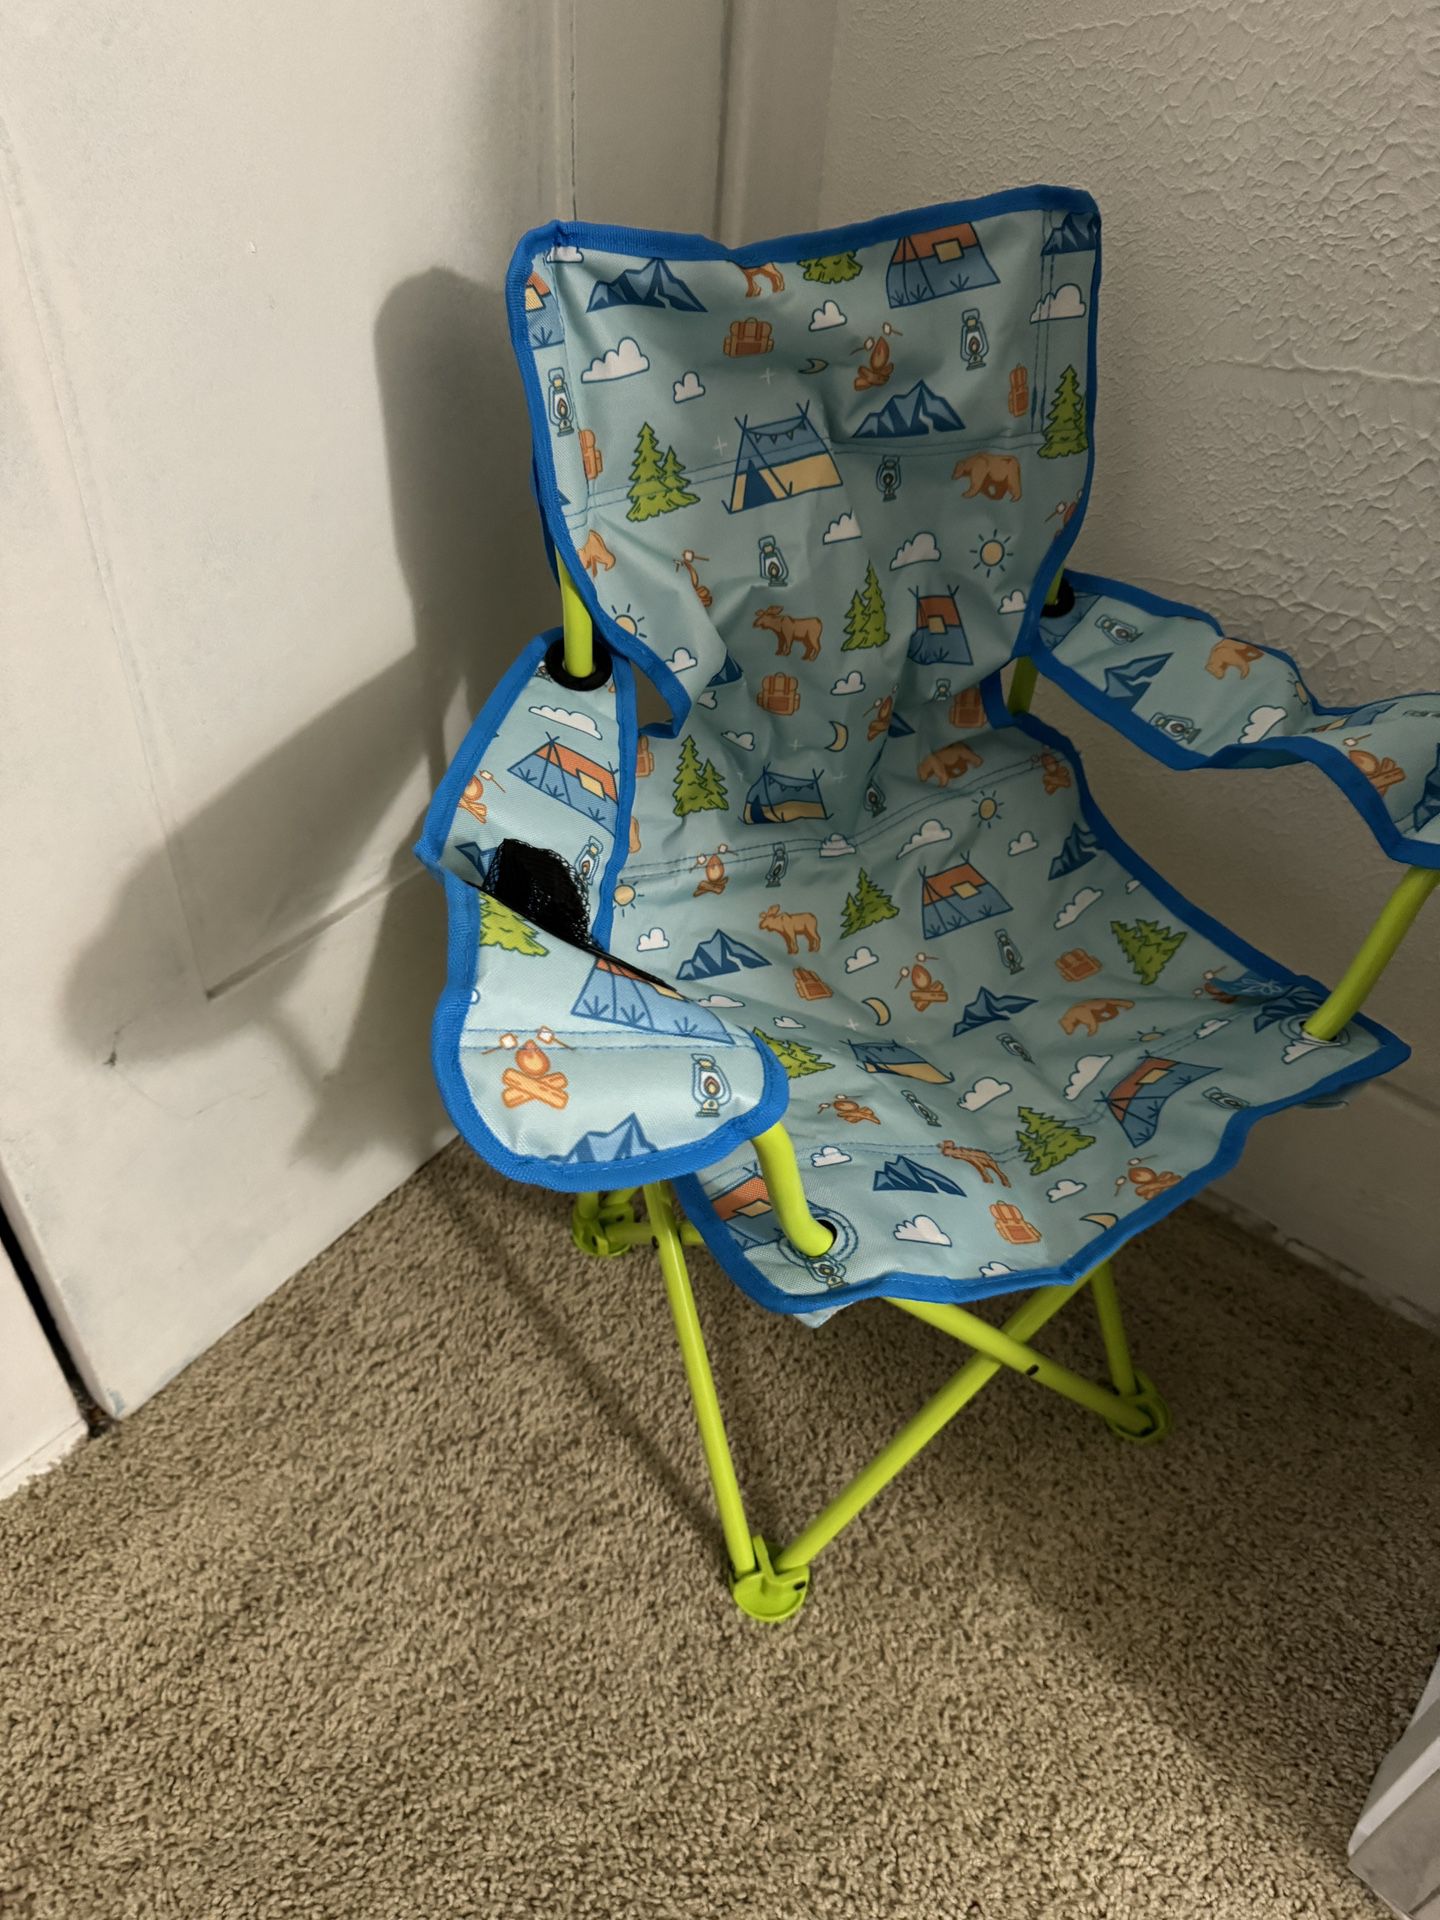 Youth Camping Chair